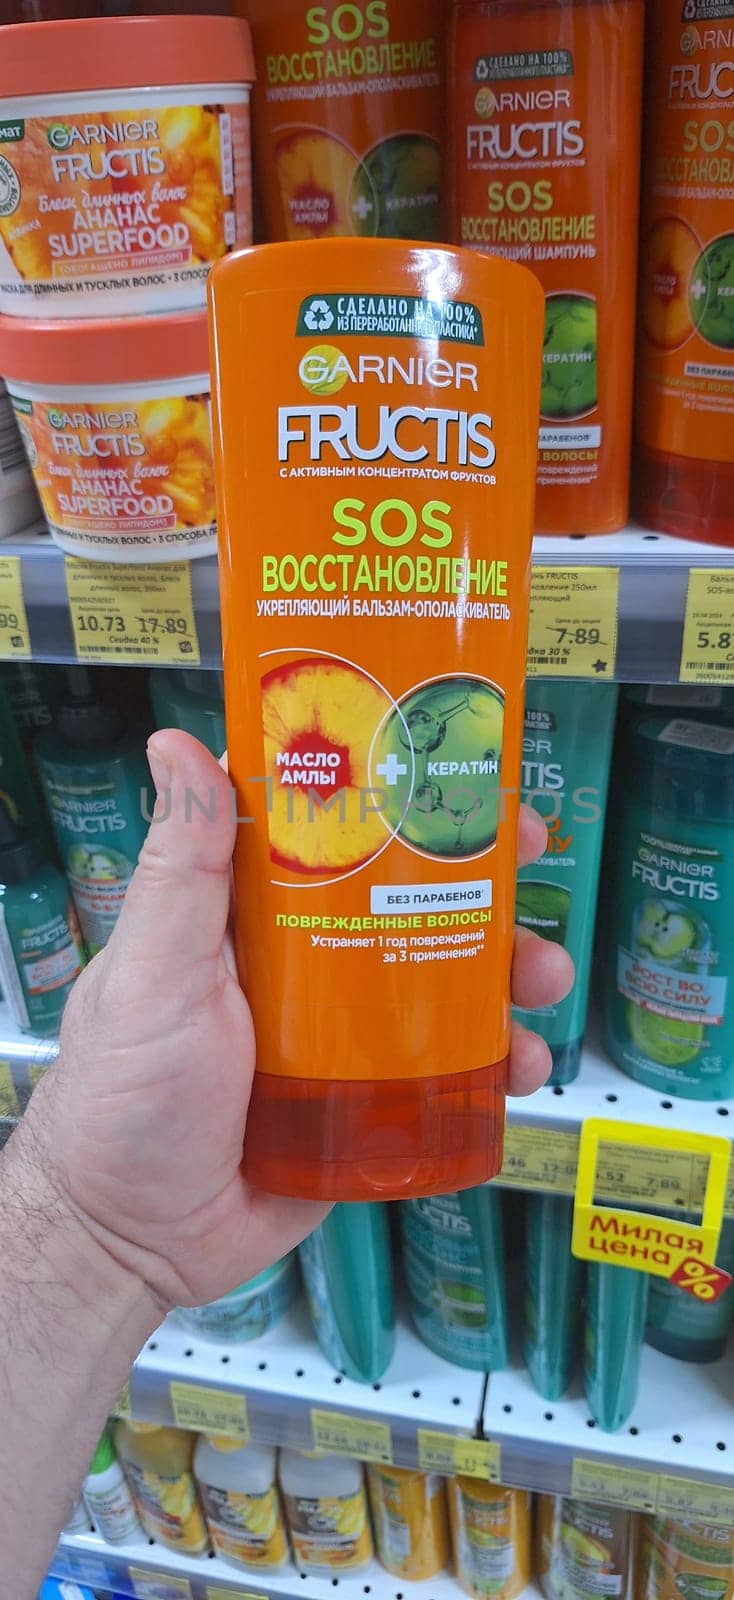 Bobruisk, Belarus - May 1, 2024: A person holds a bottle of Garnier Fructis SOS Restoration Balm in the shampoo aisle of a grocery store, showcasing the product.